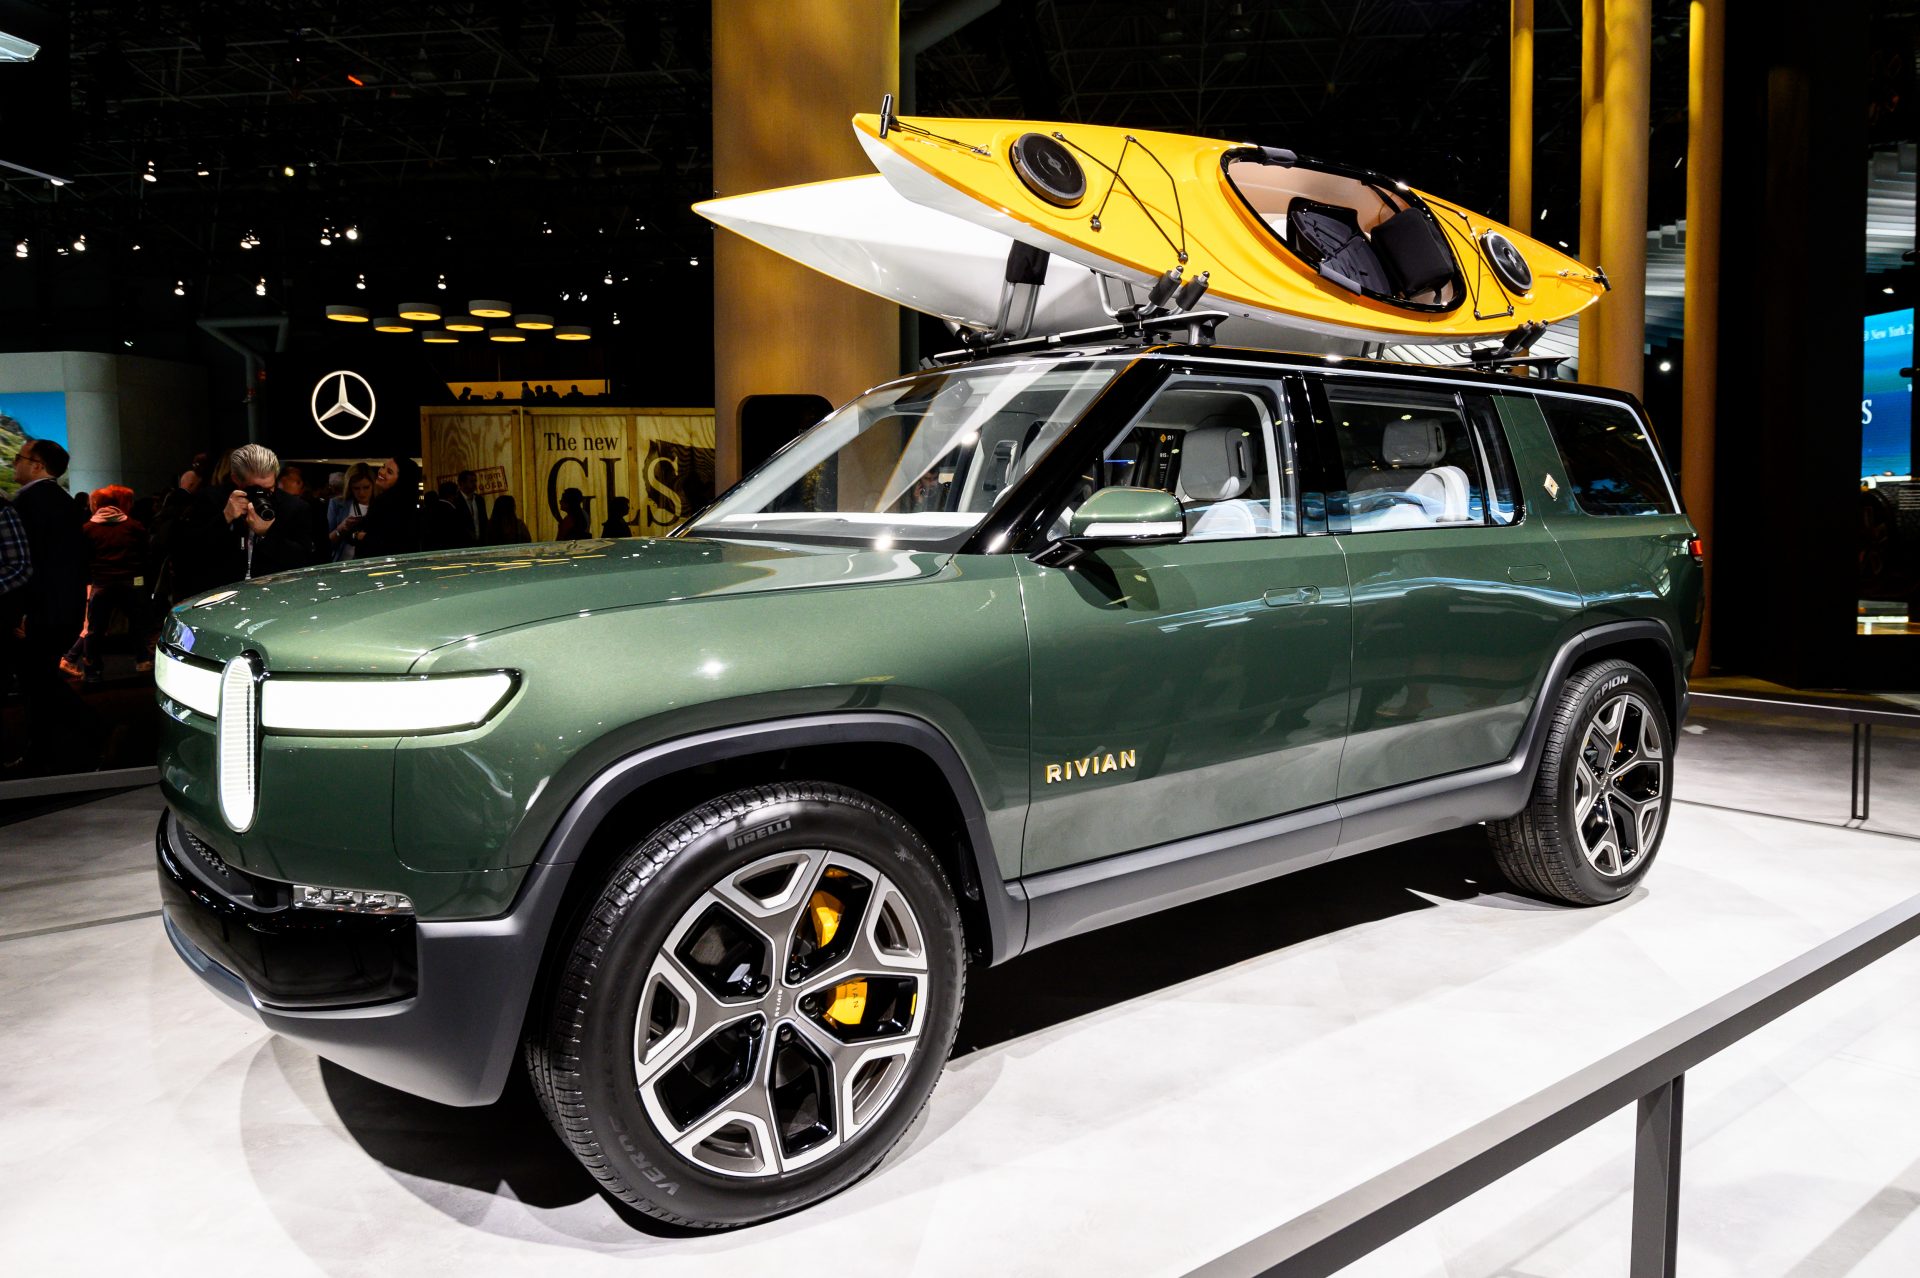 Rivian plans a community of 10,000 EV chargers in North The United States by 2023